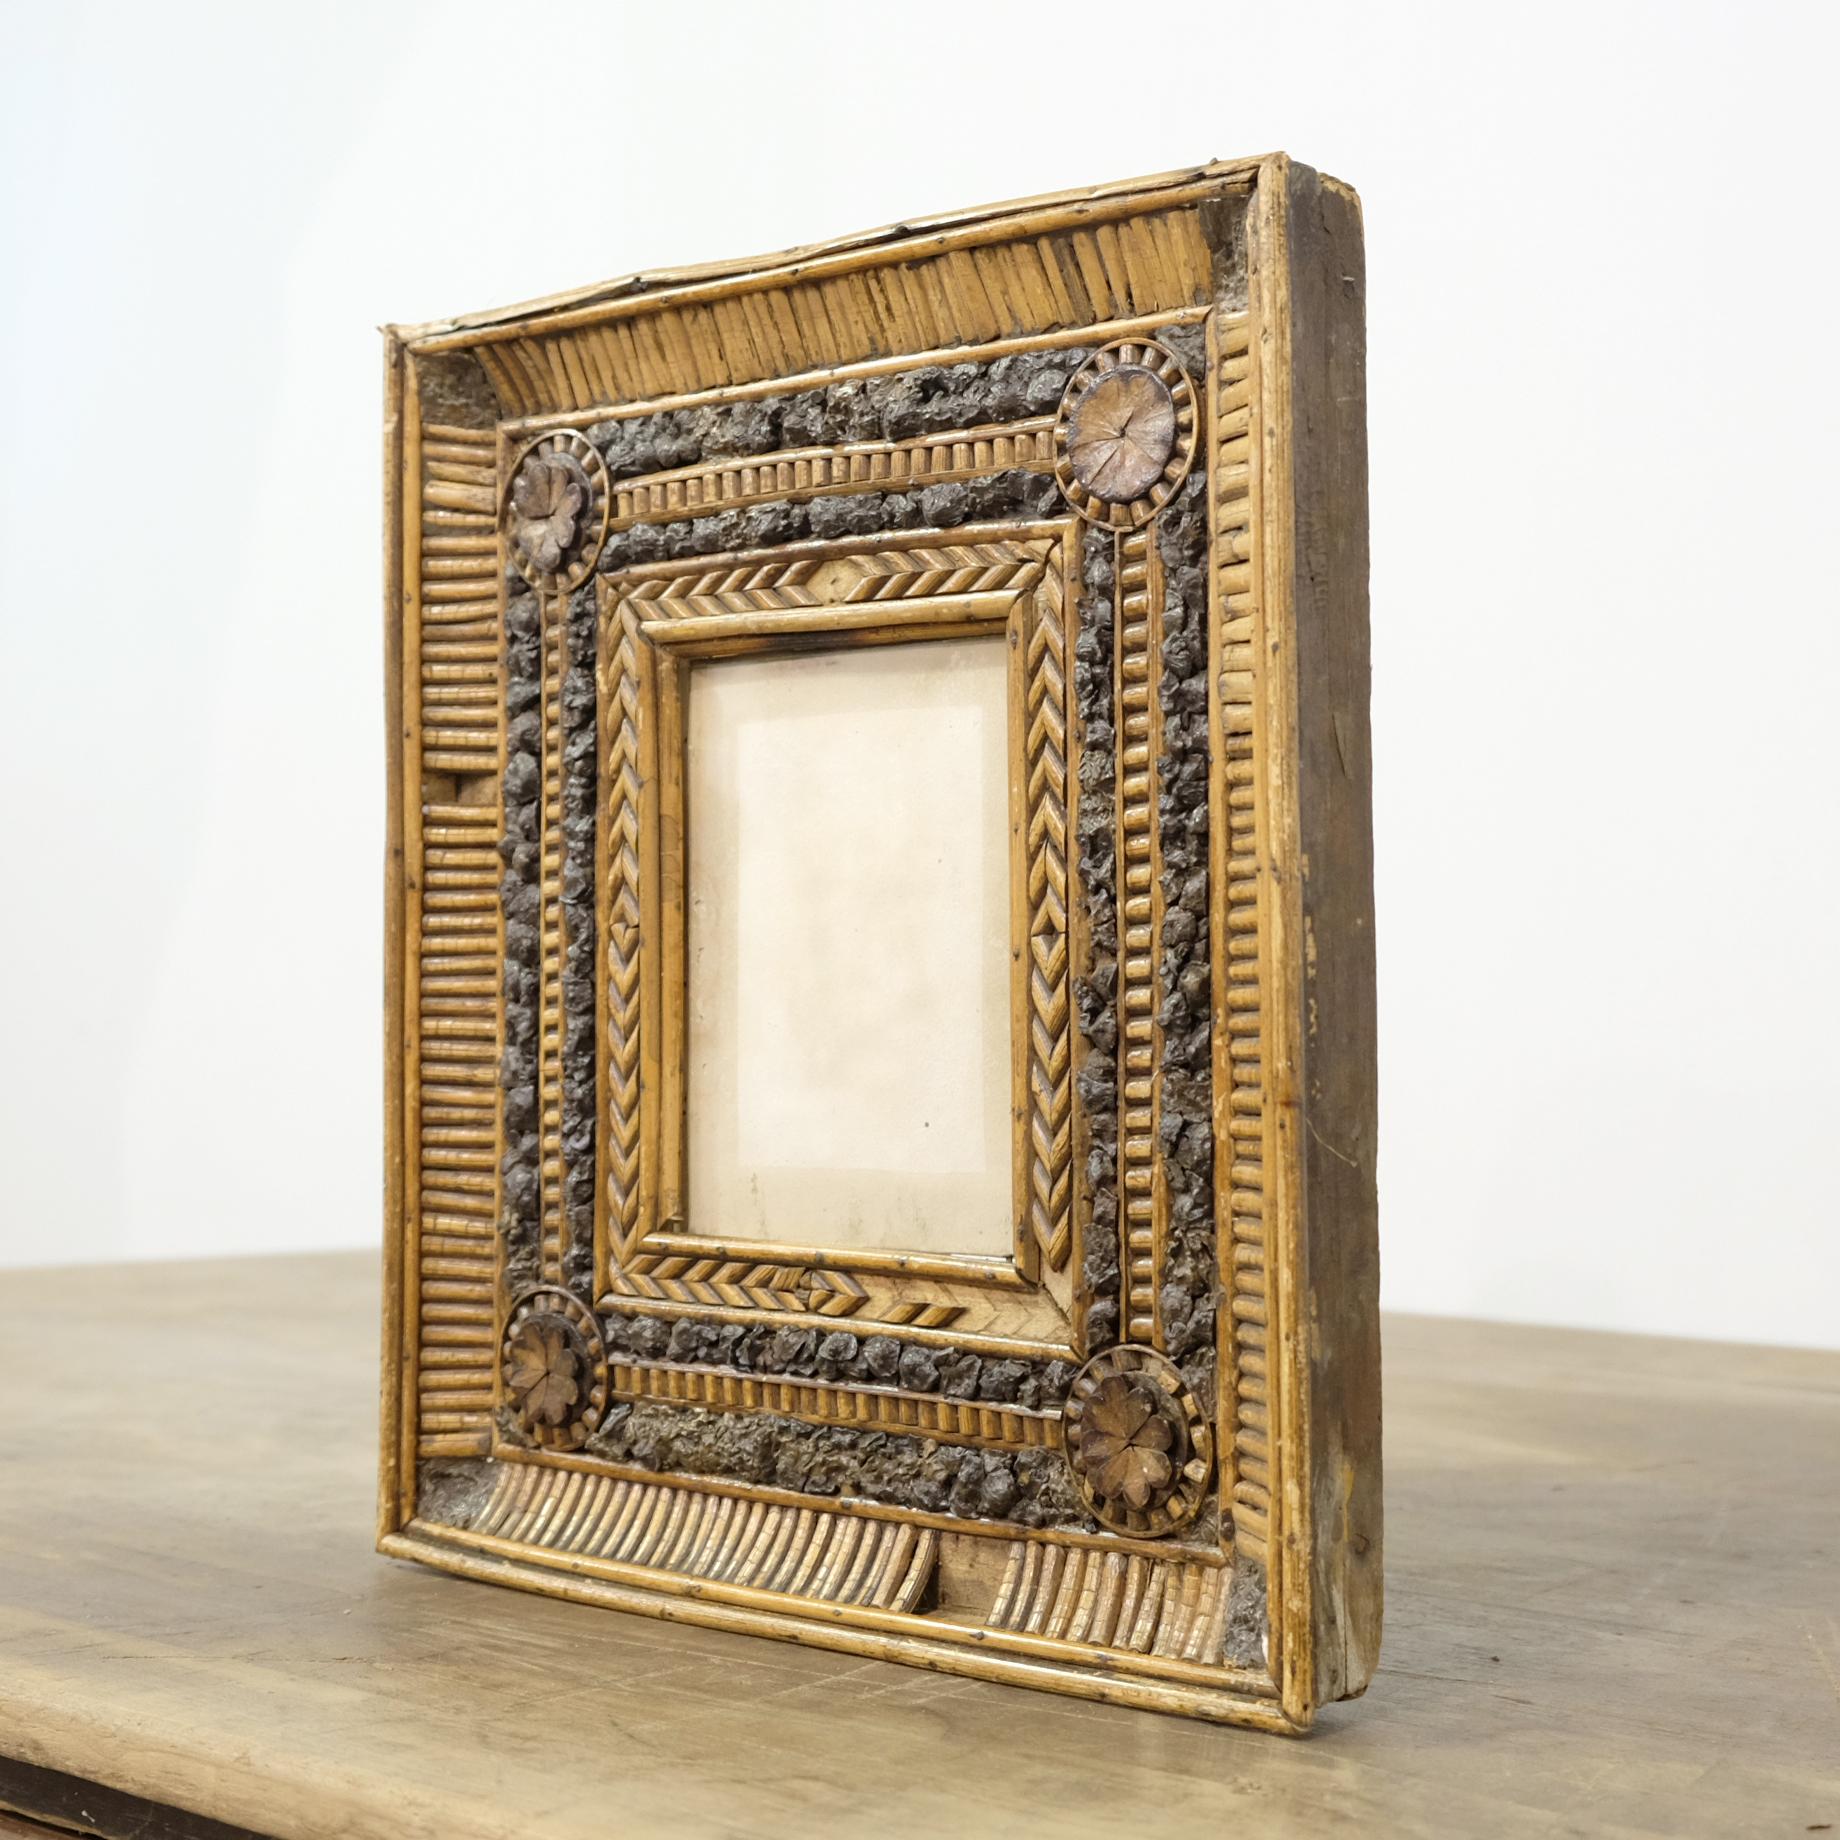 A delightfully charming and unusual 19th century Folk Art picture frame. With an extensive amount of applied intricate twig and bark decoration around a small glazed aperture. With some losses which we feel adds to its character. A great piece for a